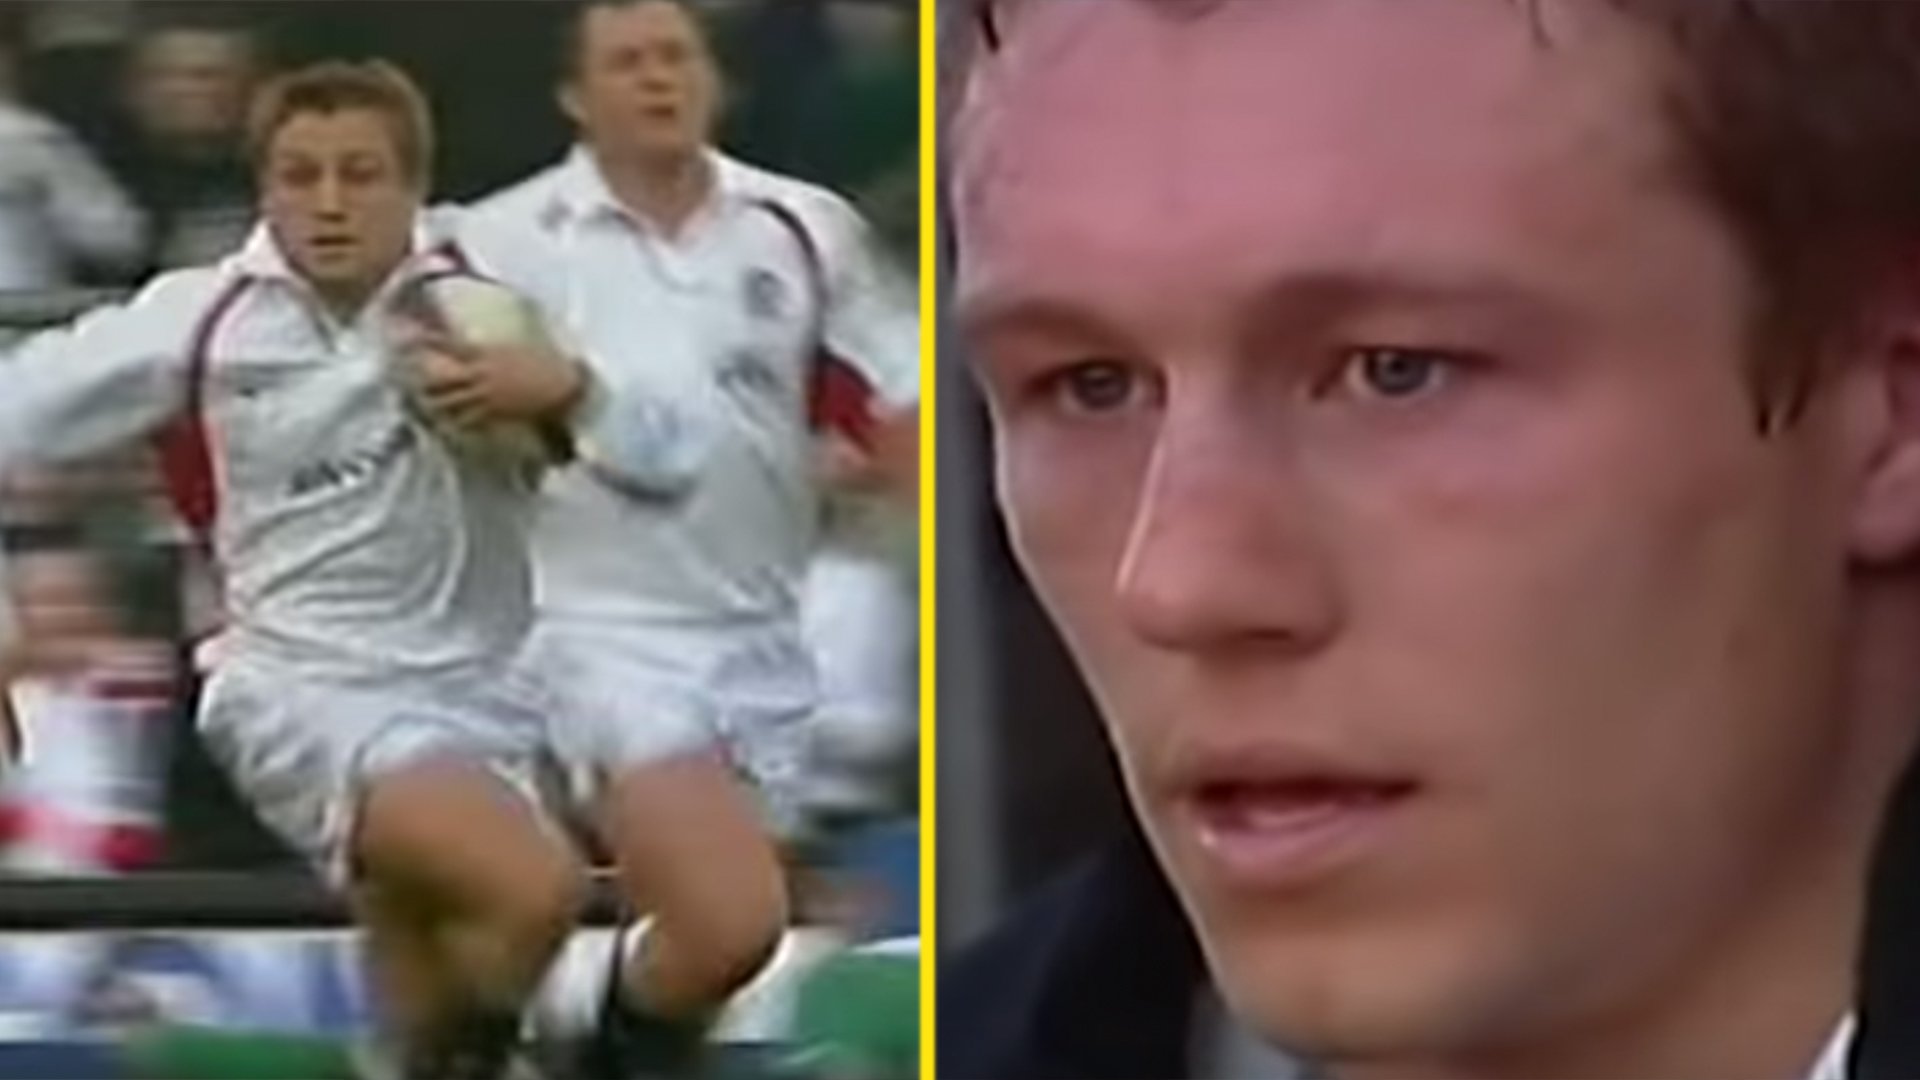 The England Rugby Team In 2002 Was Unbeatable Full Footage Of Their Dismantling Of Ireland